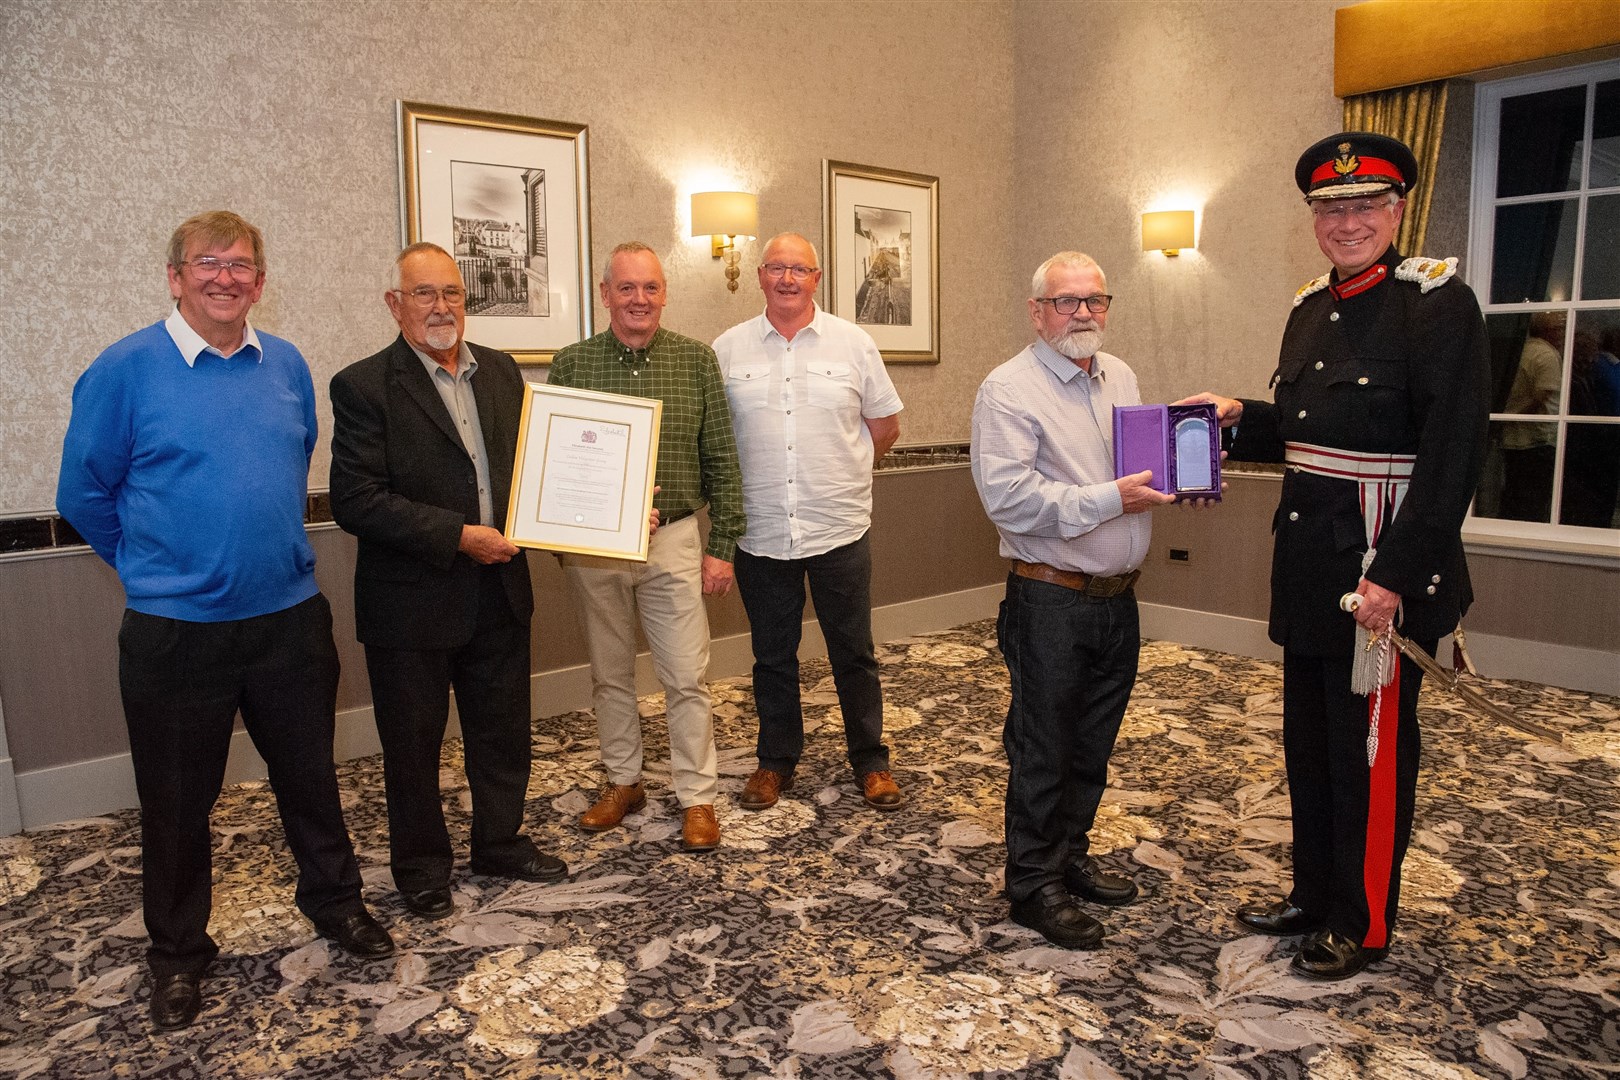 (From left) CVG members Stan Slater, Bruce Porter, Barry Addison, Willie Jappy, Alex Donn and Lord Lieutenant of Banffshire Andrew Simpson. Picture: Daniel Forsyth